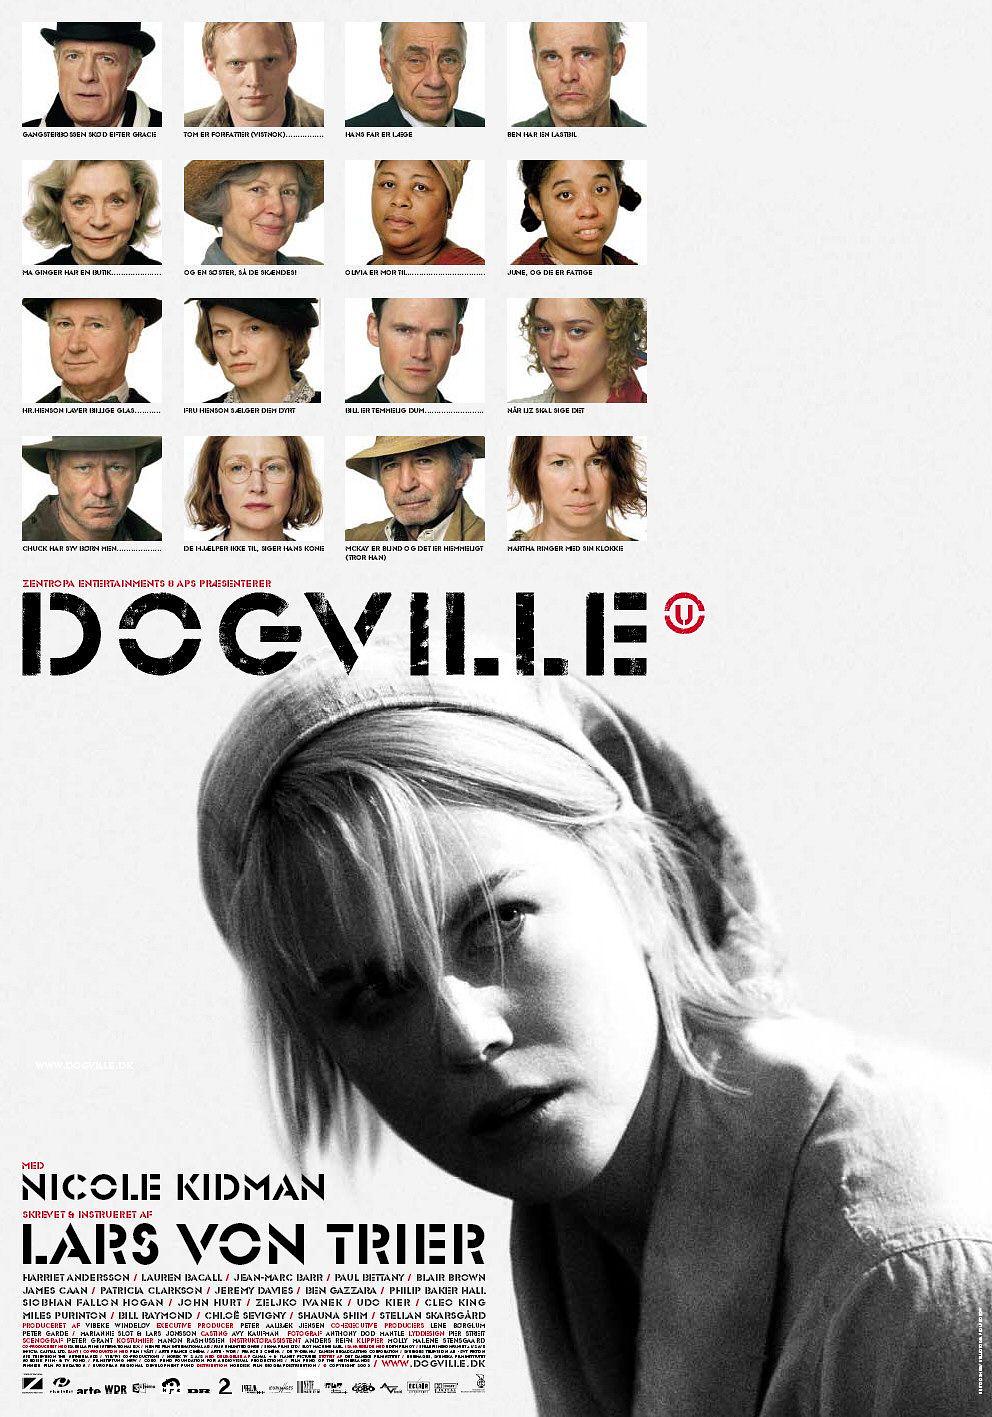  Dogville.2003.INTERNAL.720p.BluRay.x264-AMIABLE 12.76GB-1.png